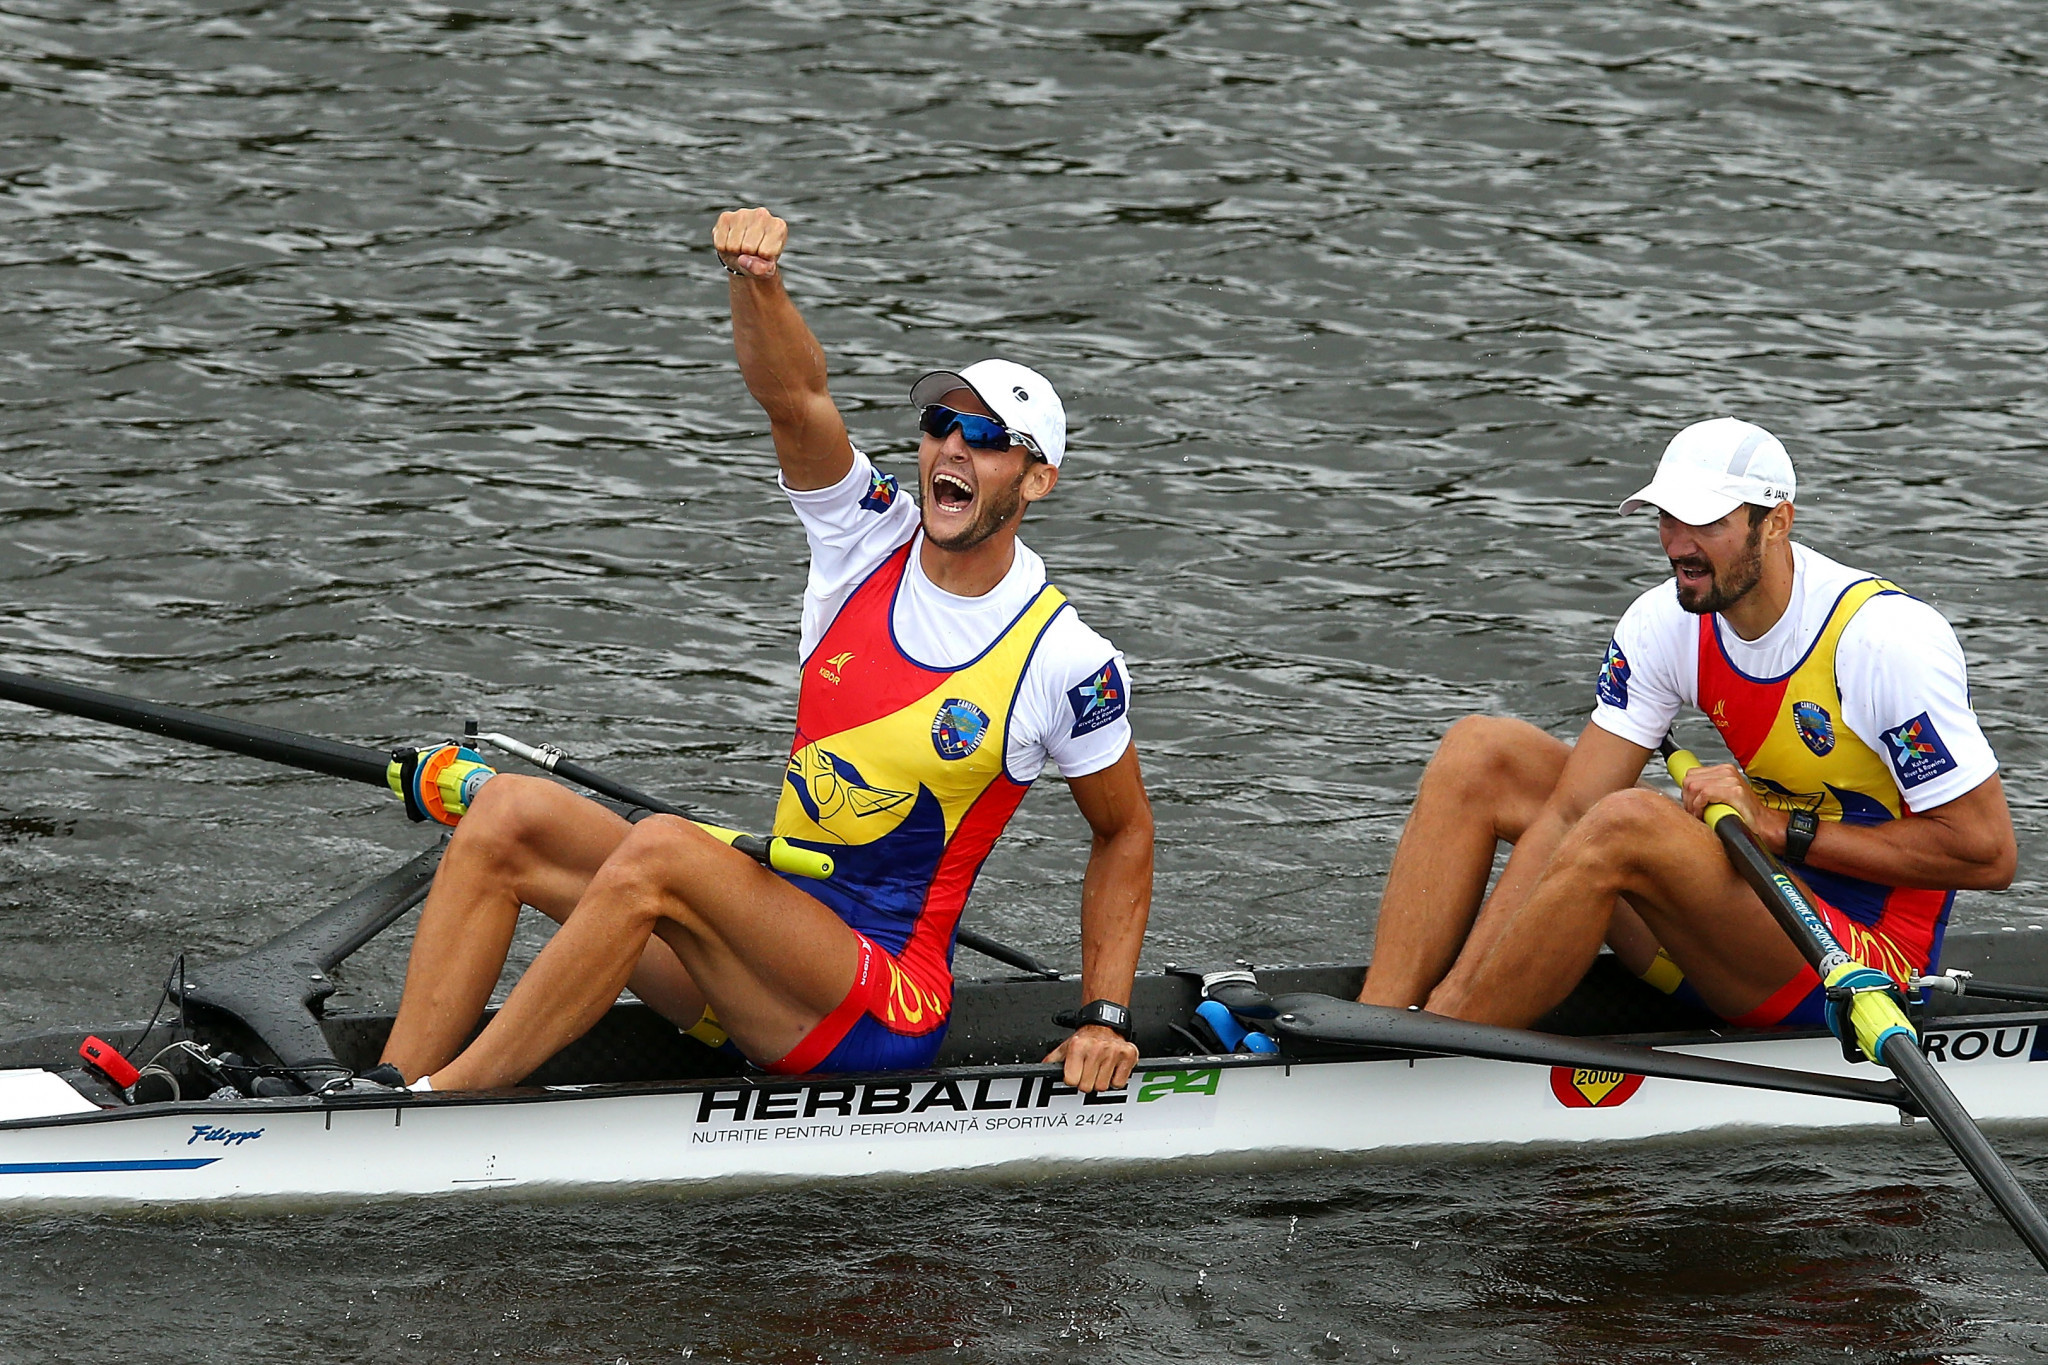  Ciprian Tudosa and Marius-Vasile Cozmiuc clinched the men's pairs title at the European Rowing Championships ©Getty Images